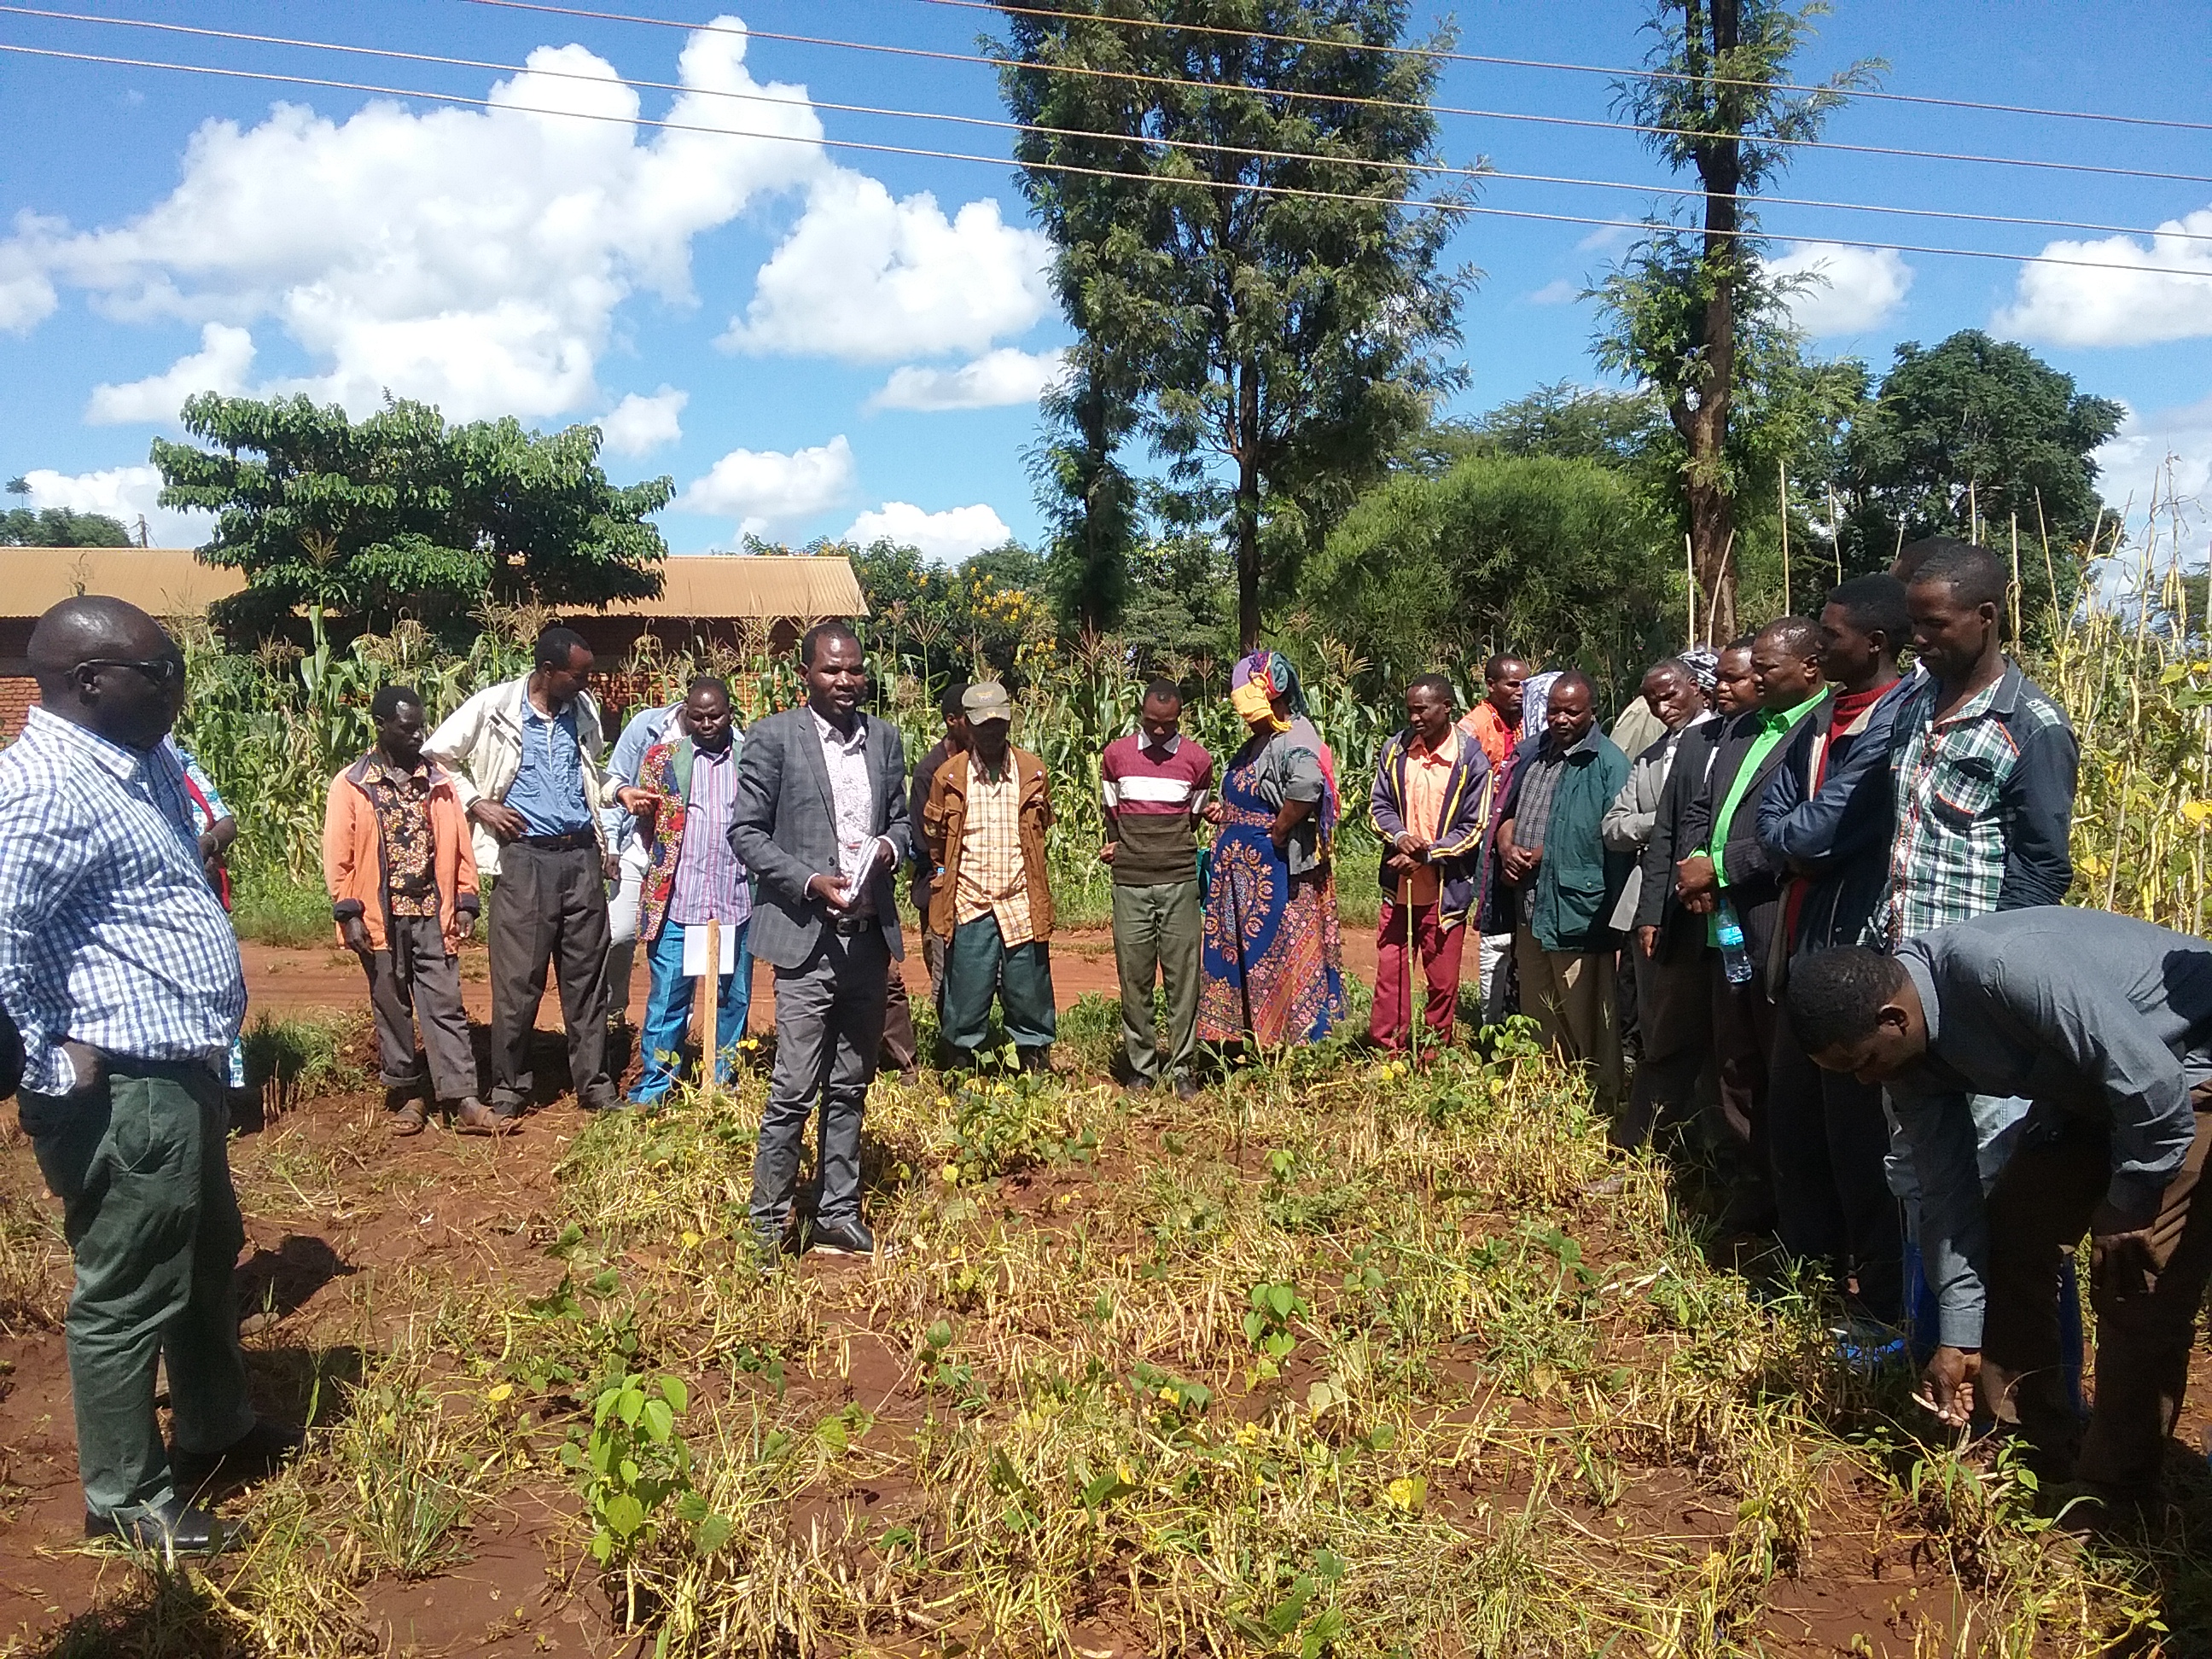 Mr. Nestory Shida, the head of Bean Program at TARI-Selian, giving detailed information on bean varieties developed by TARI-Selian center  during the Farmers Field Day at Hydom,Mbulu District on 01/04/2021